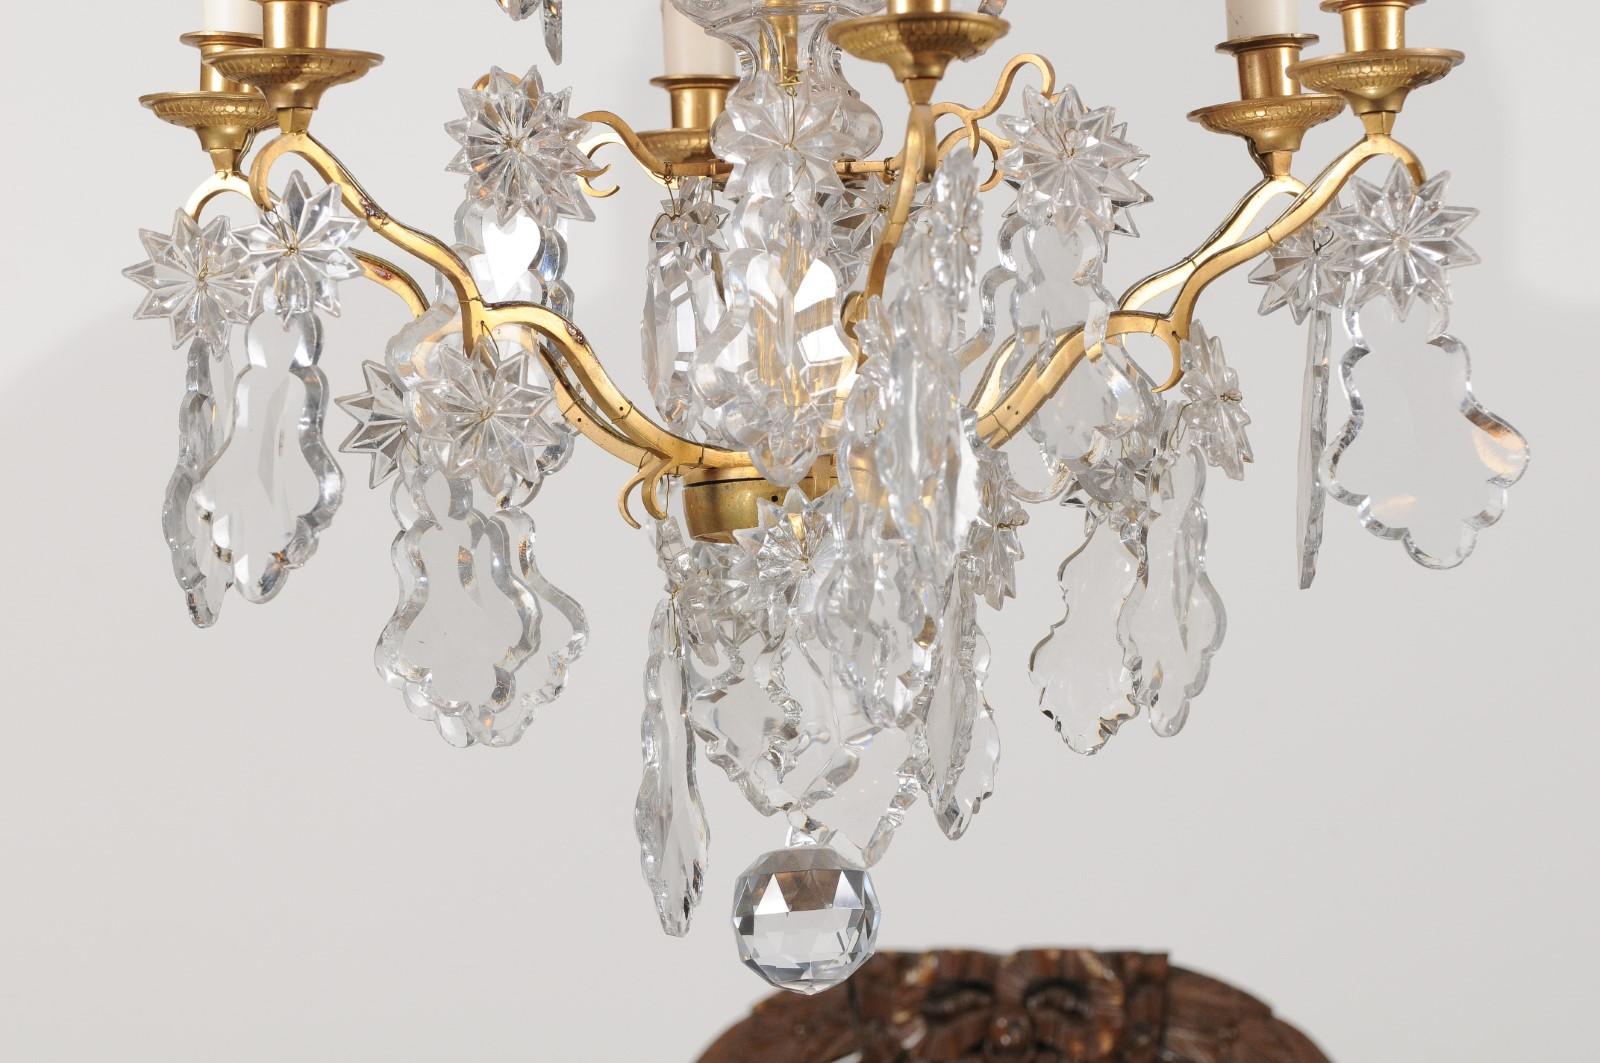 French 1850s Napoleon III Six-Light Crystal and Brass Chandelier with Pendeloques For Sale